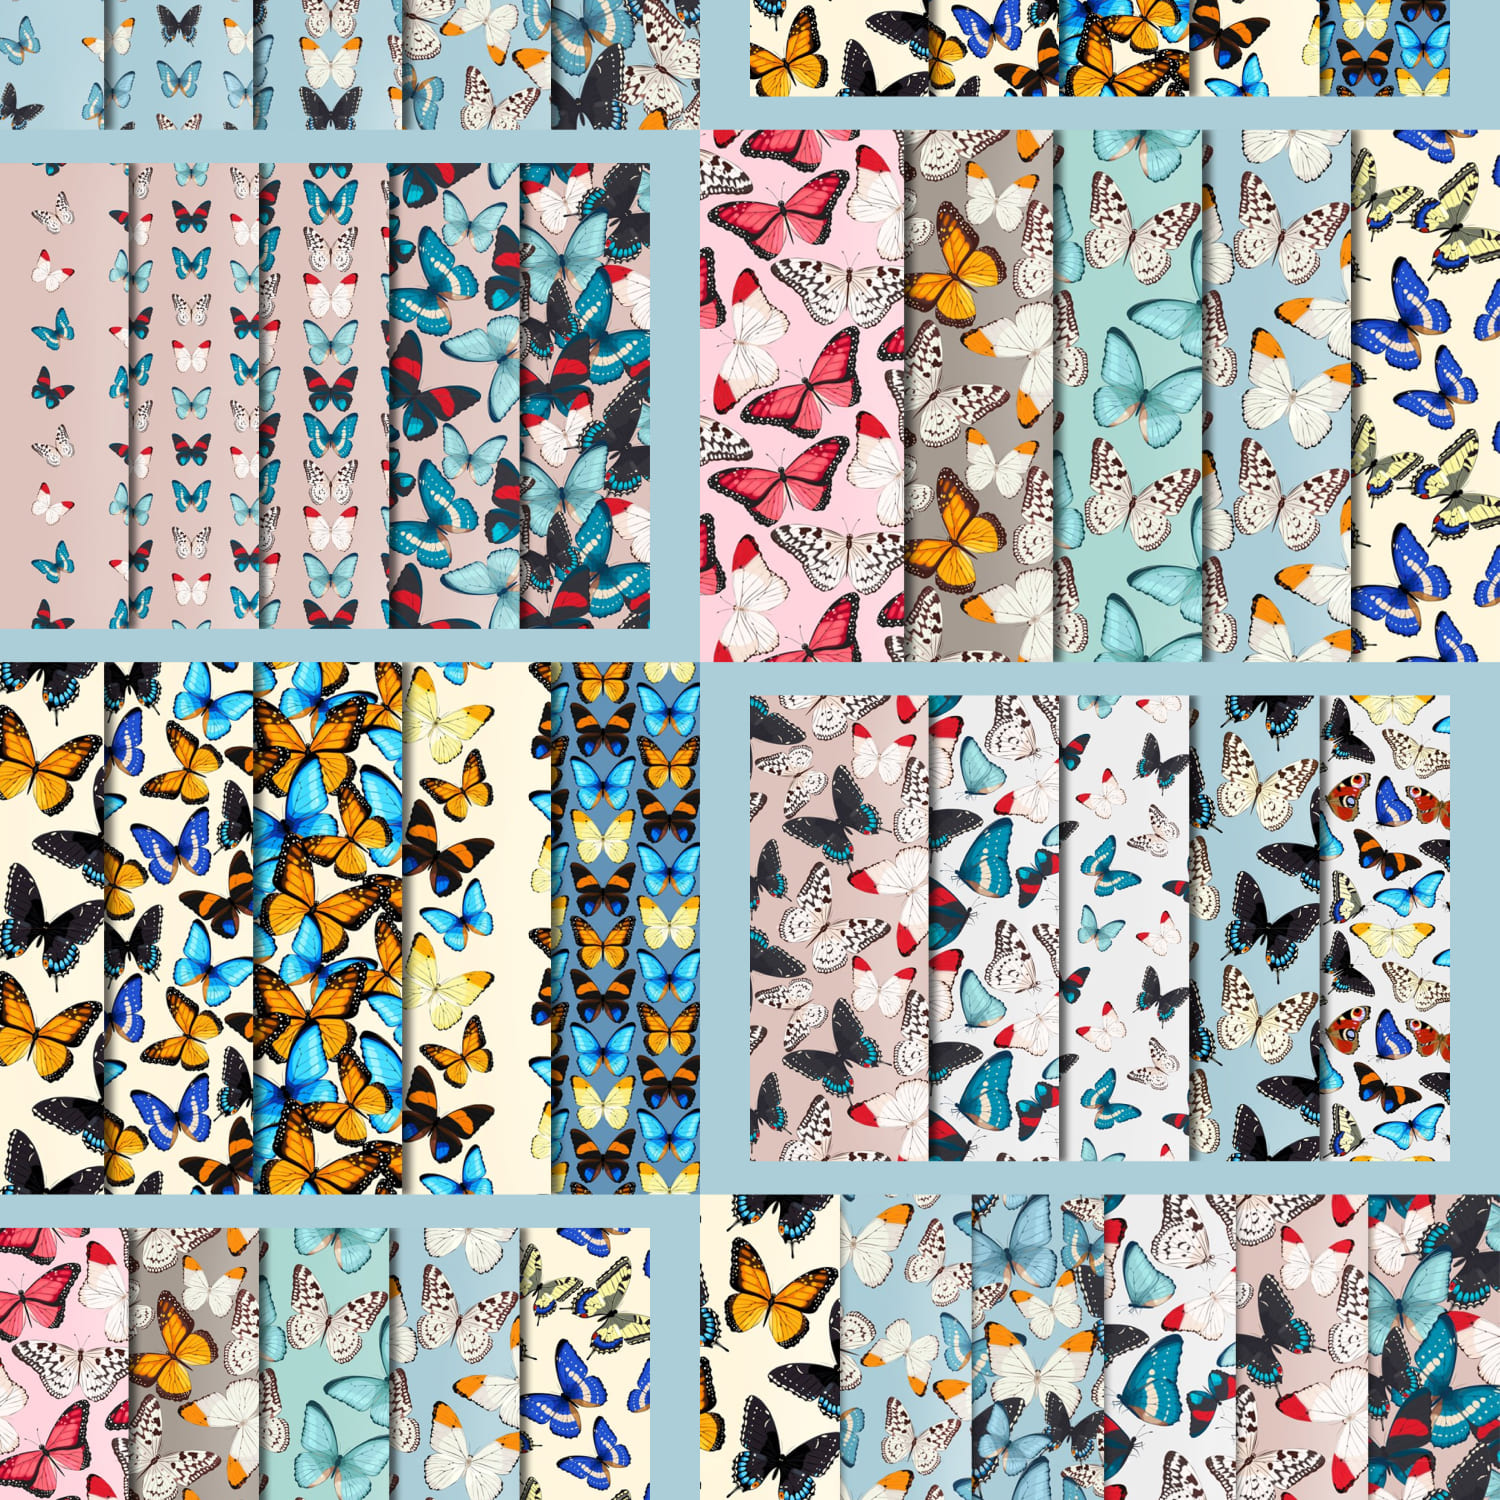 Butterfly Patterns cover.